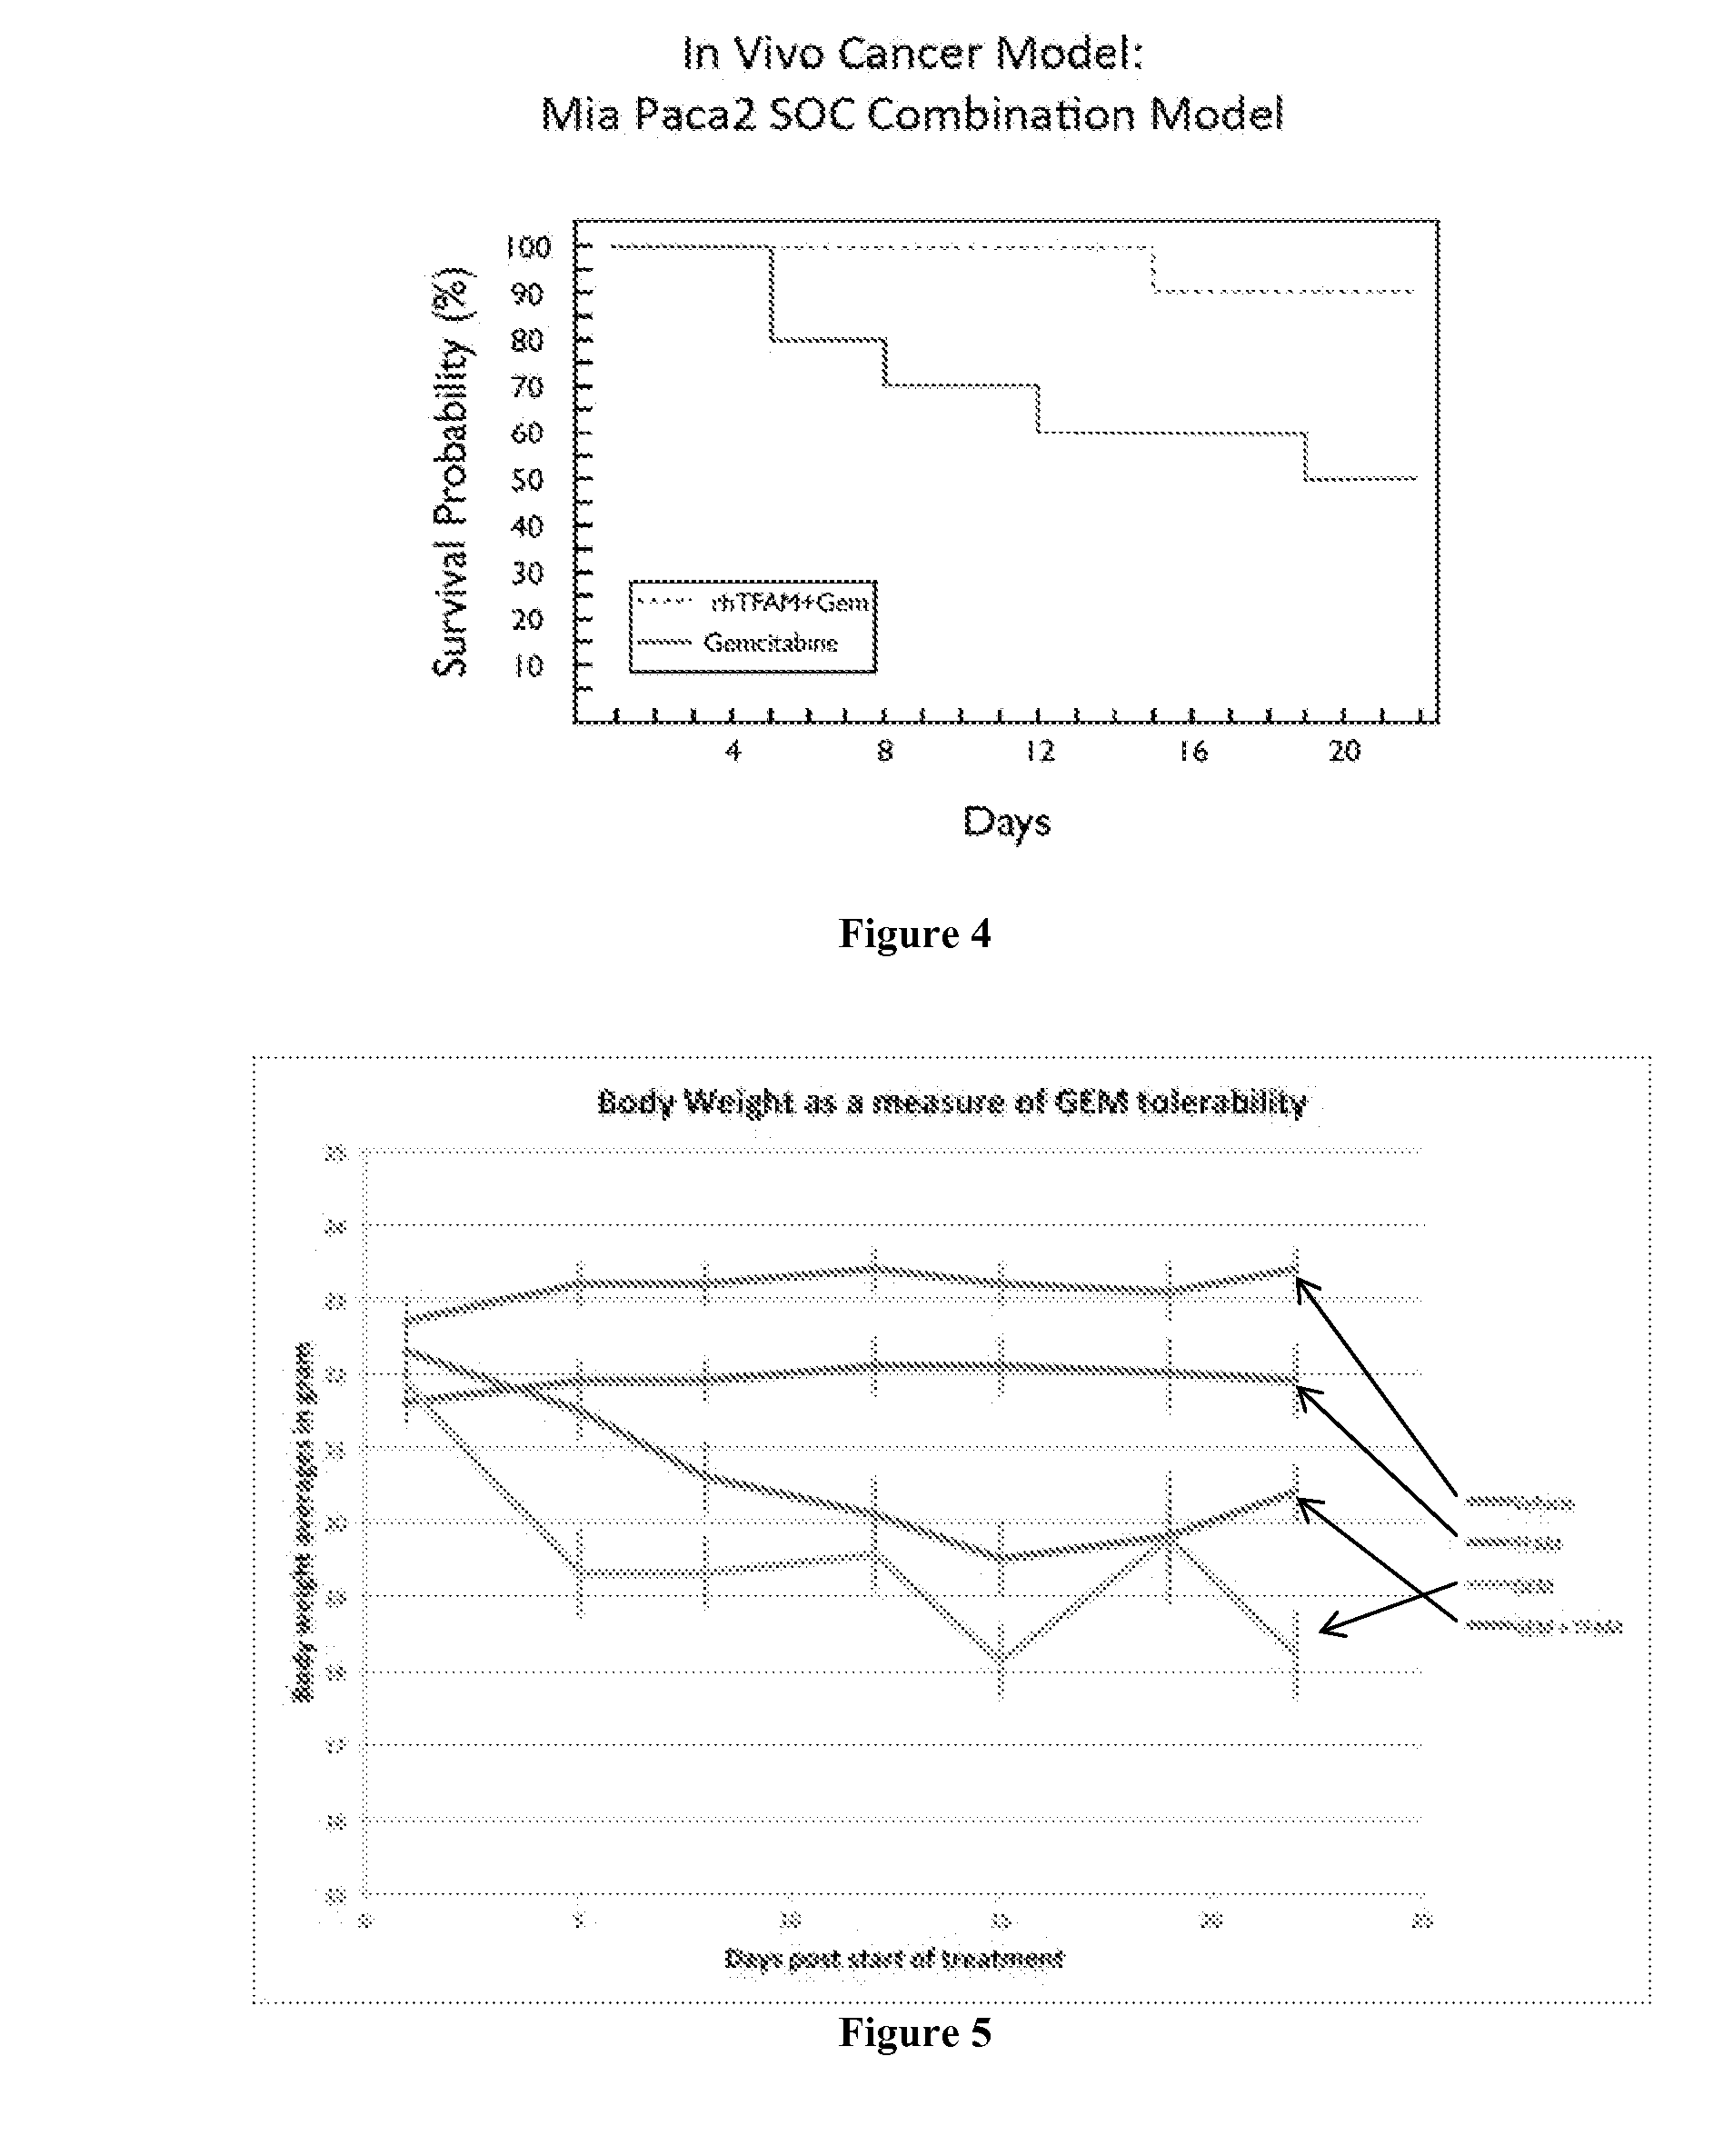 Methods of Mitigating Side Effects of Radiation Exposure and Chemotherapy